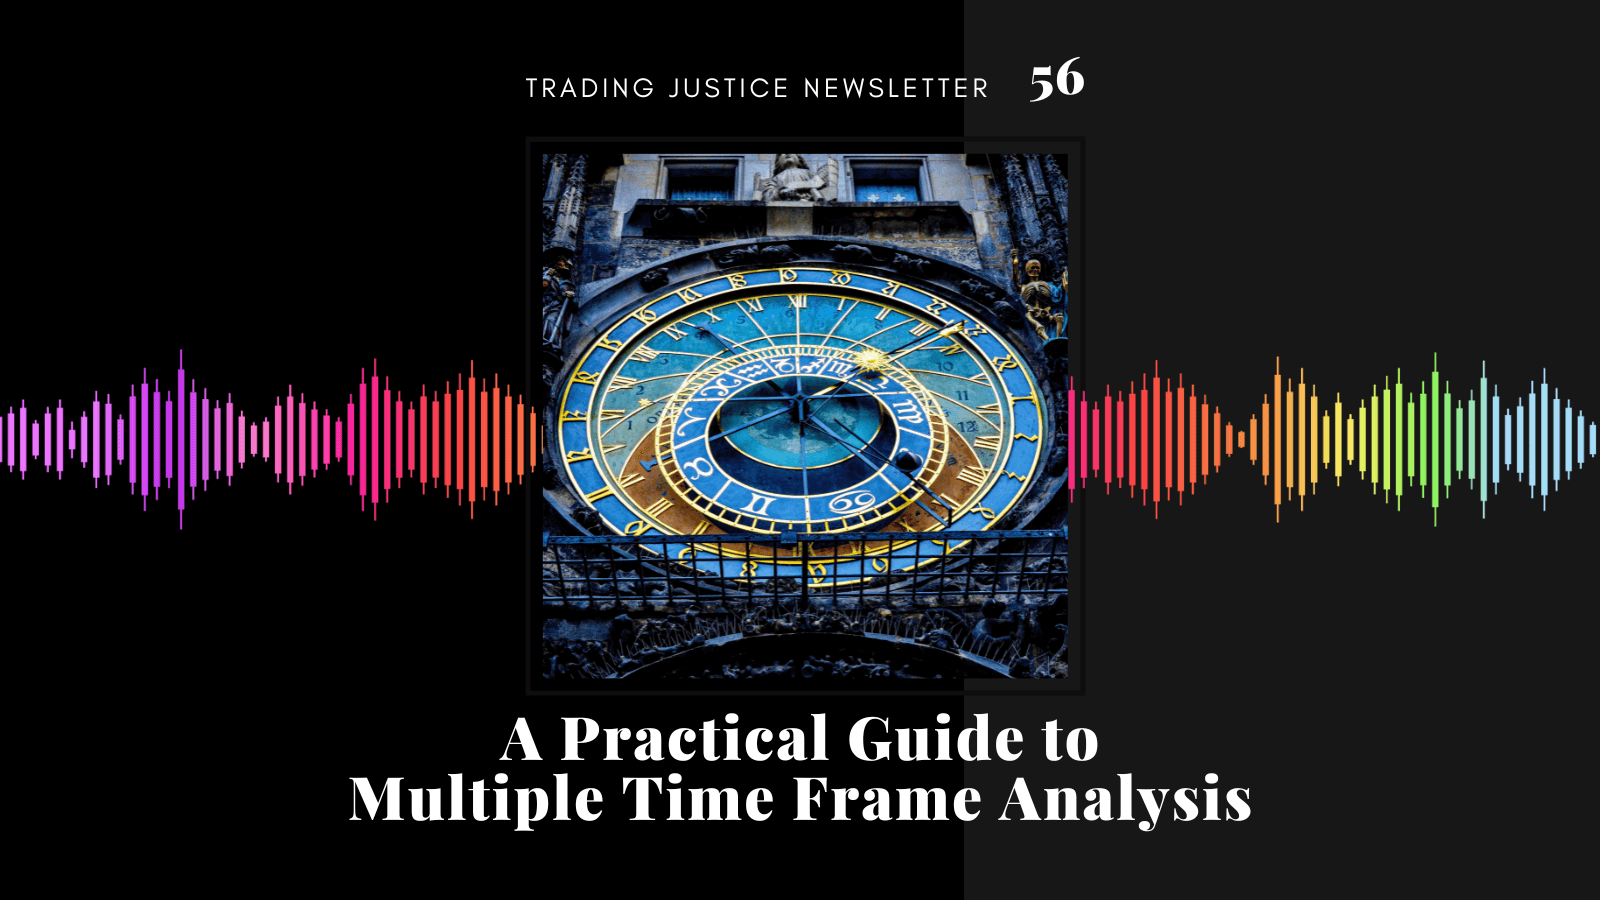 A Practical Guide to Multiple Time Frame Analysis | Trading Justice Newsletter Vol. 56